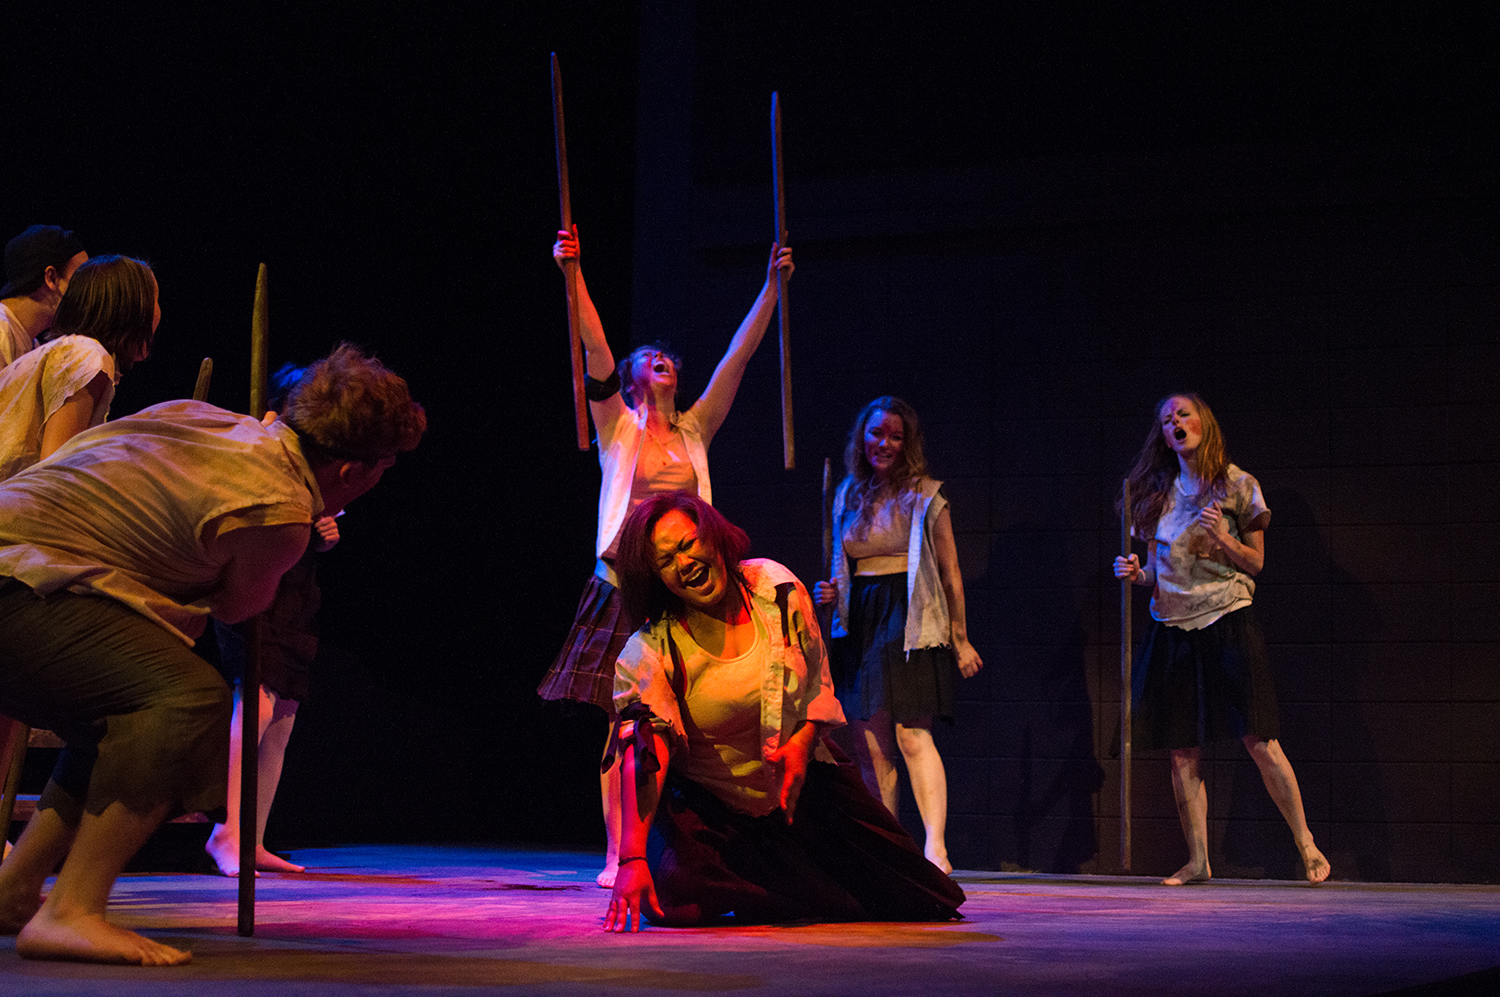 Ouachita’s Department of Theatre Arts to present “Lord of the Flies” Nov. 5-10.